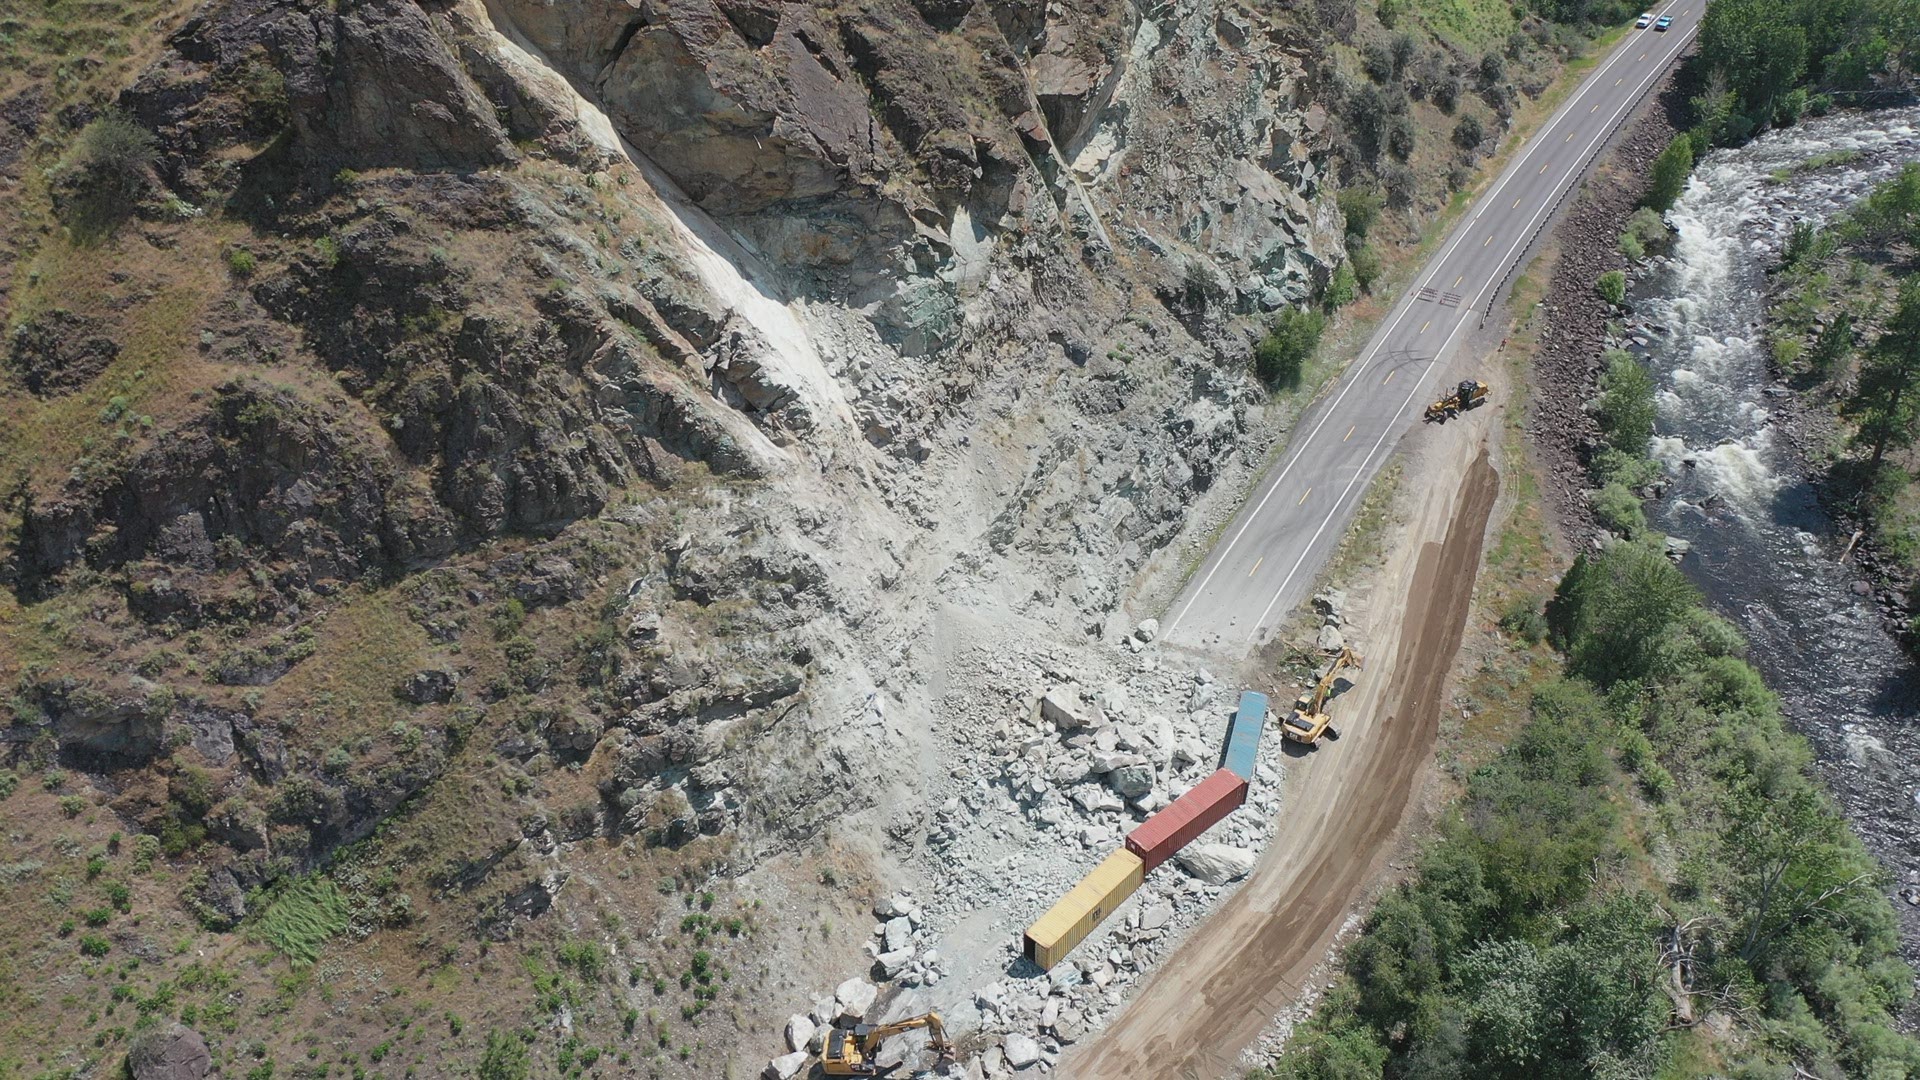 A massive rockslide has covered the highway since Friday. Officials say it is still unstable.